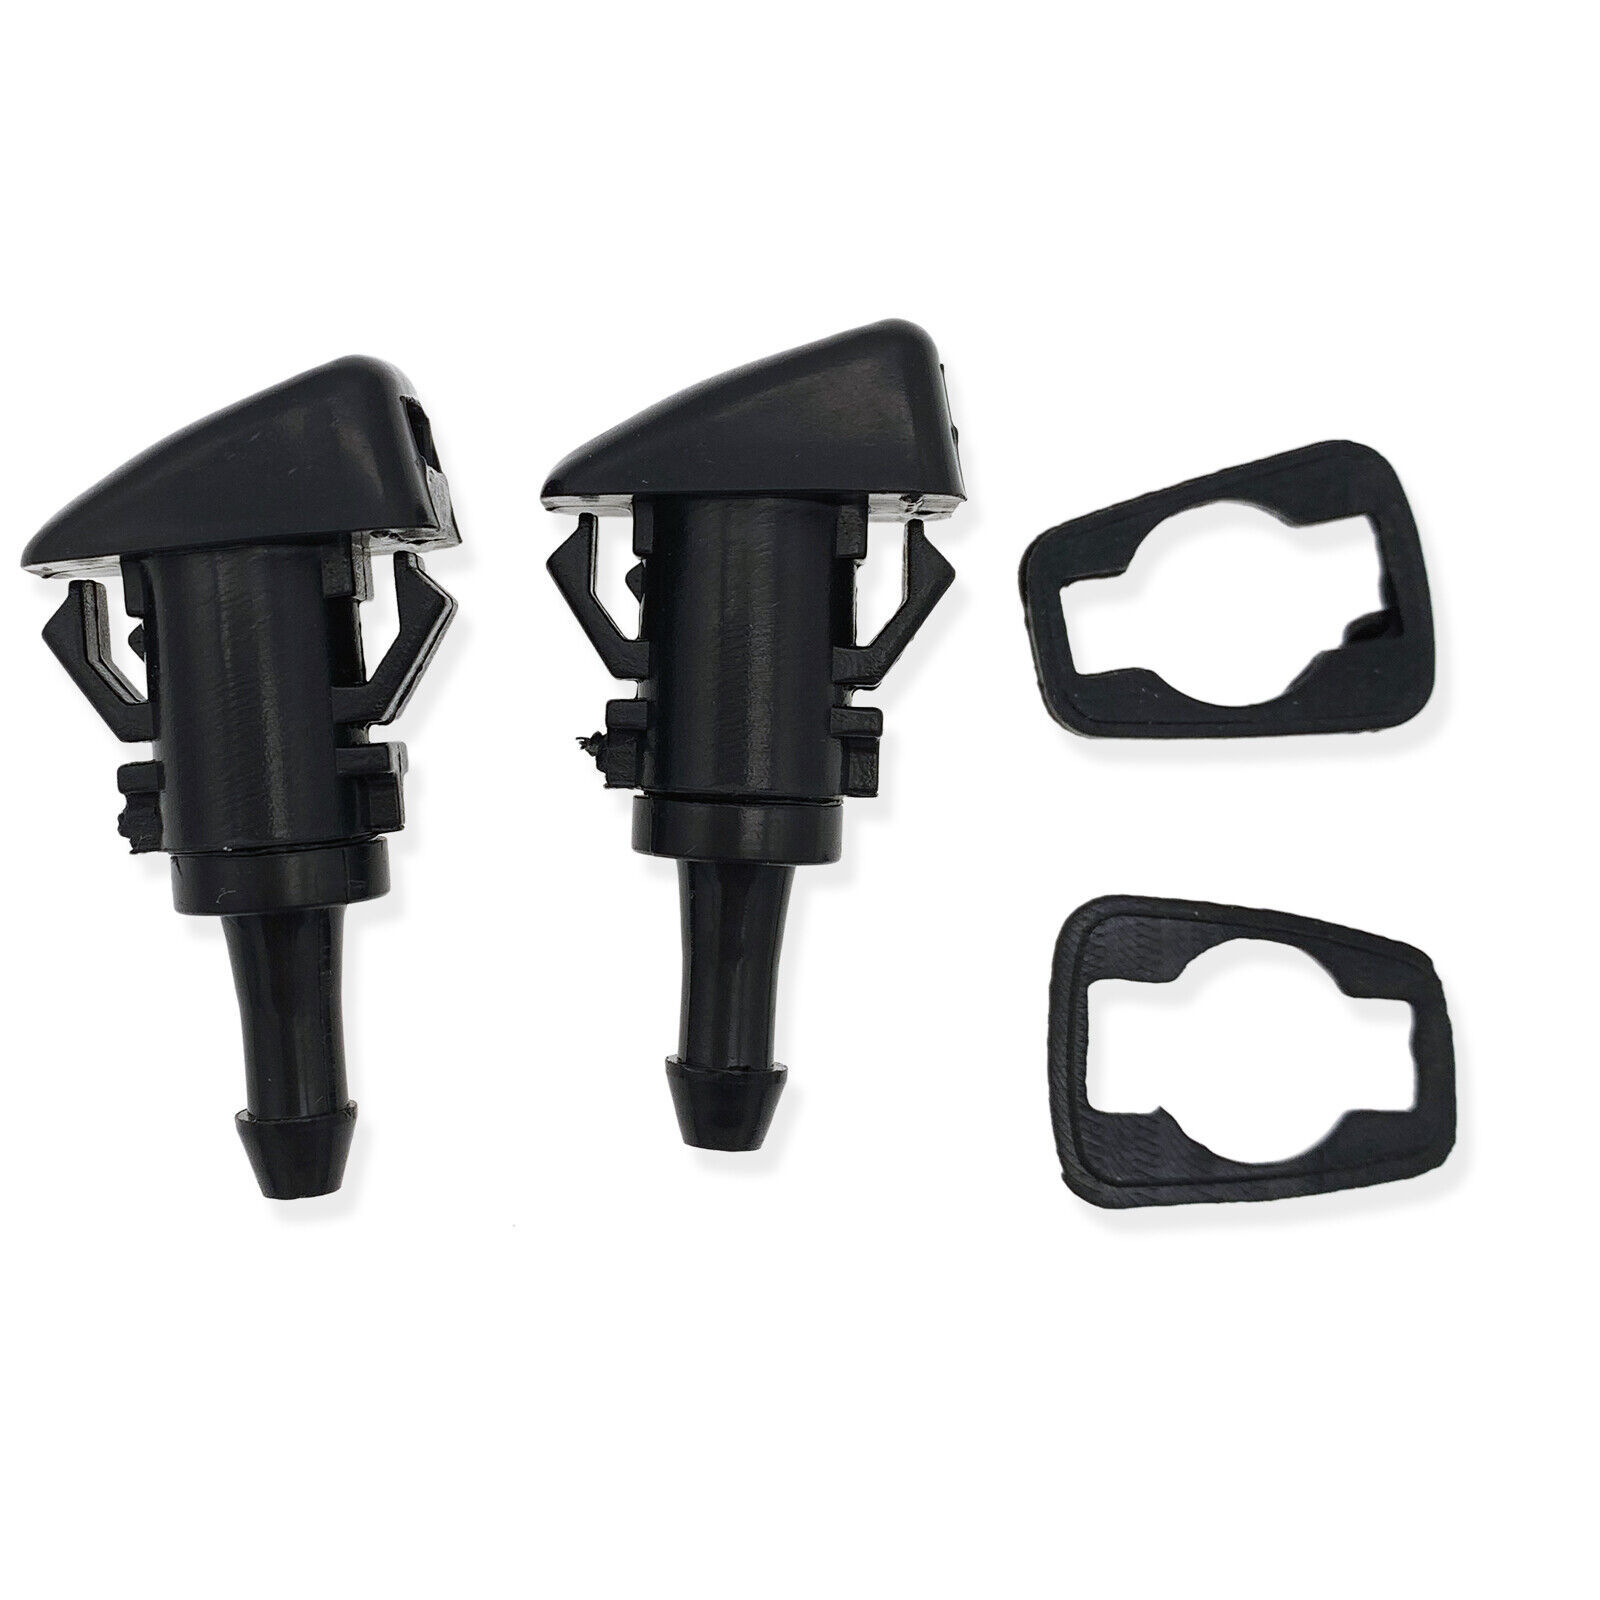 2 Windshield Washer Fluid Spray Jet Nozzle Kit Front Fit For Ford